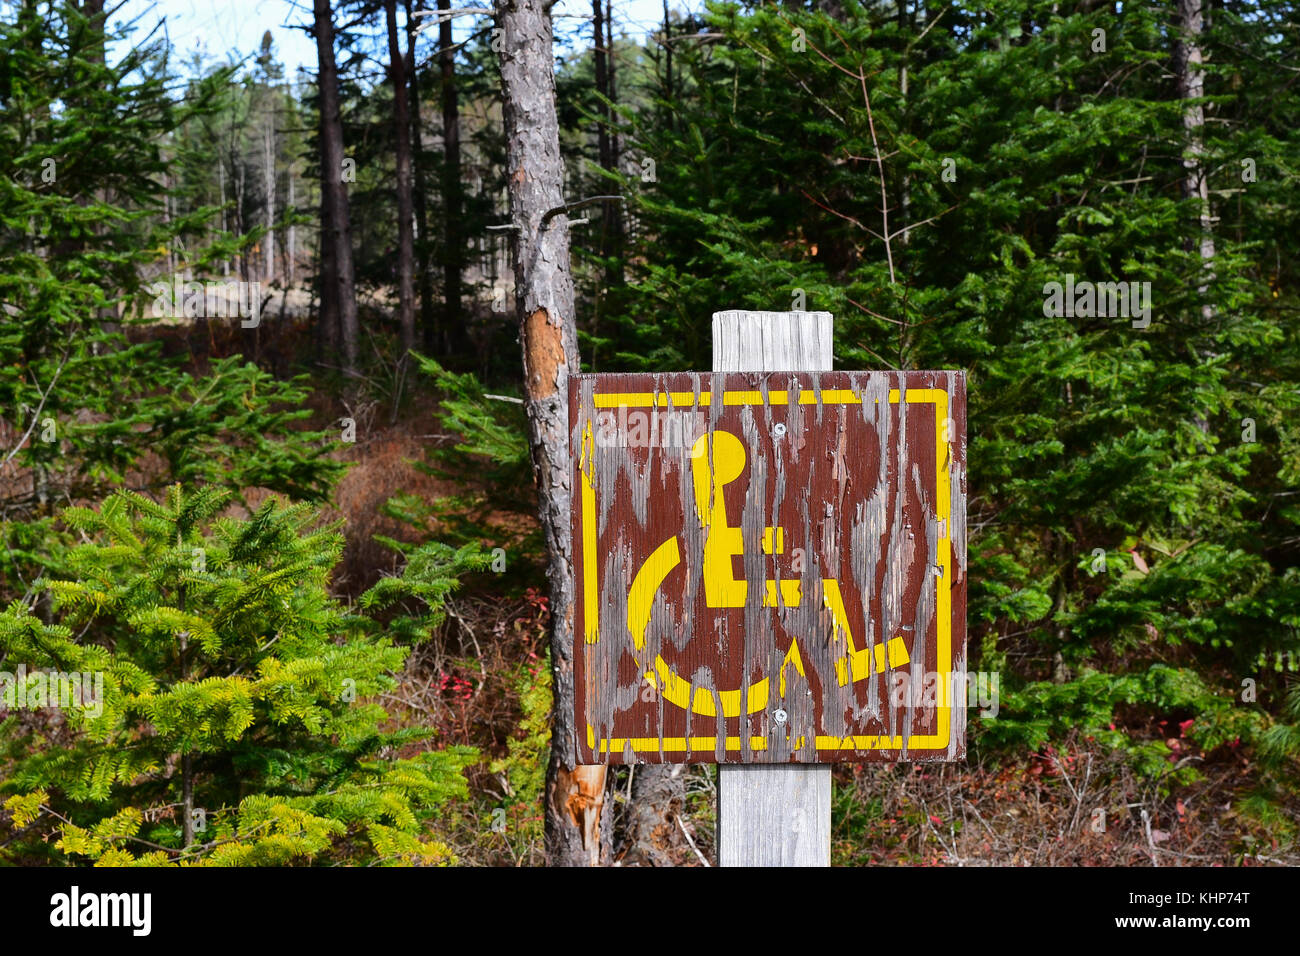 Neglected peeling handicapped parking sign in a wilderness parking lot. Stock Photo